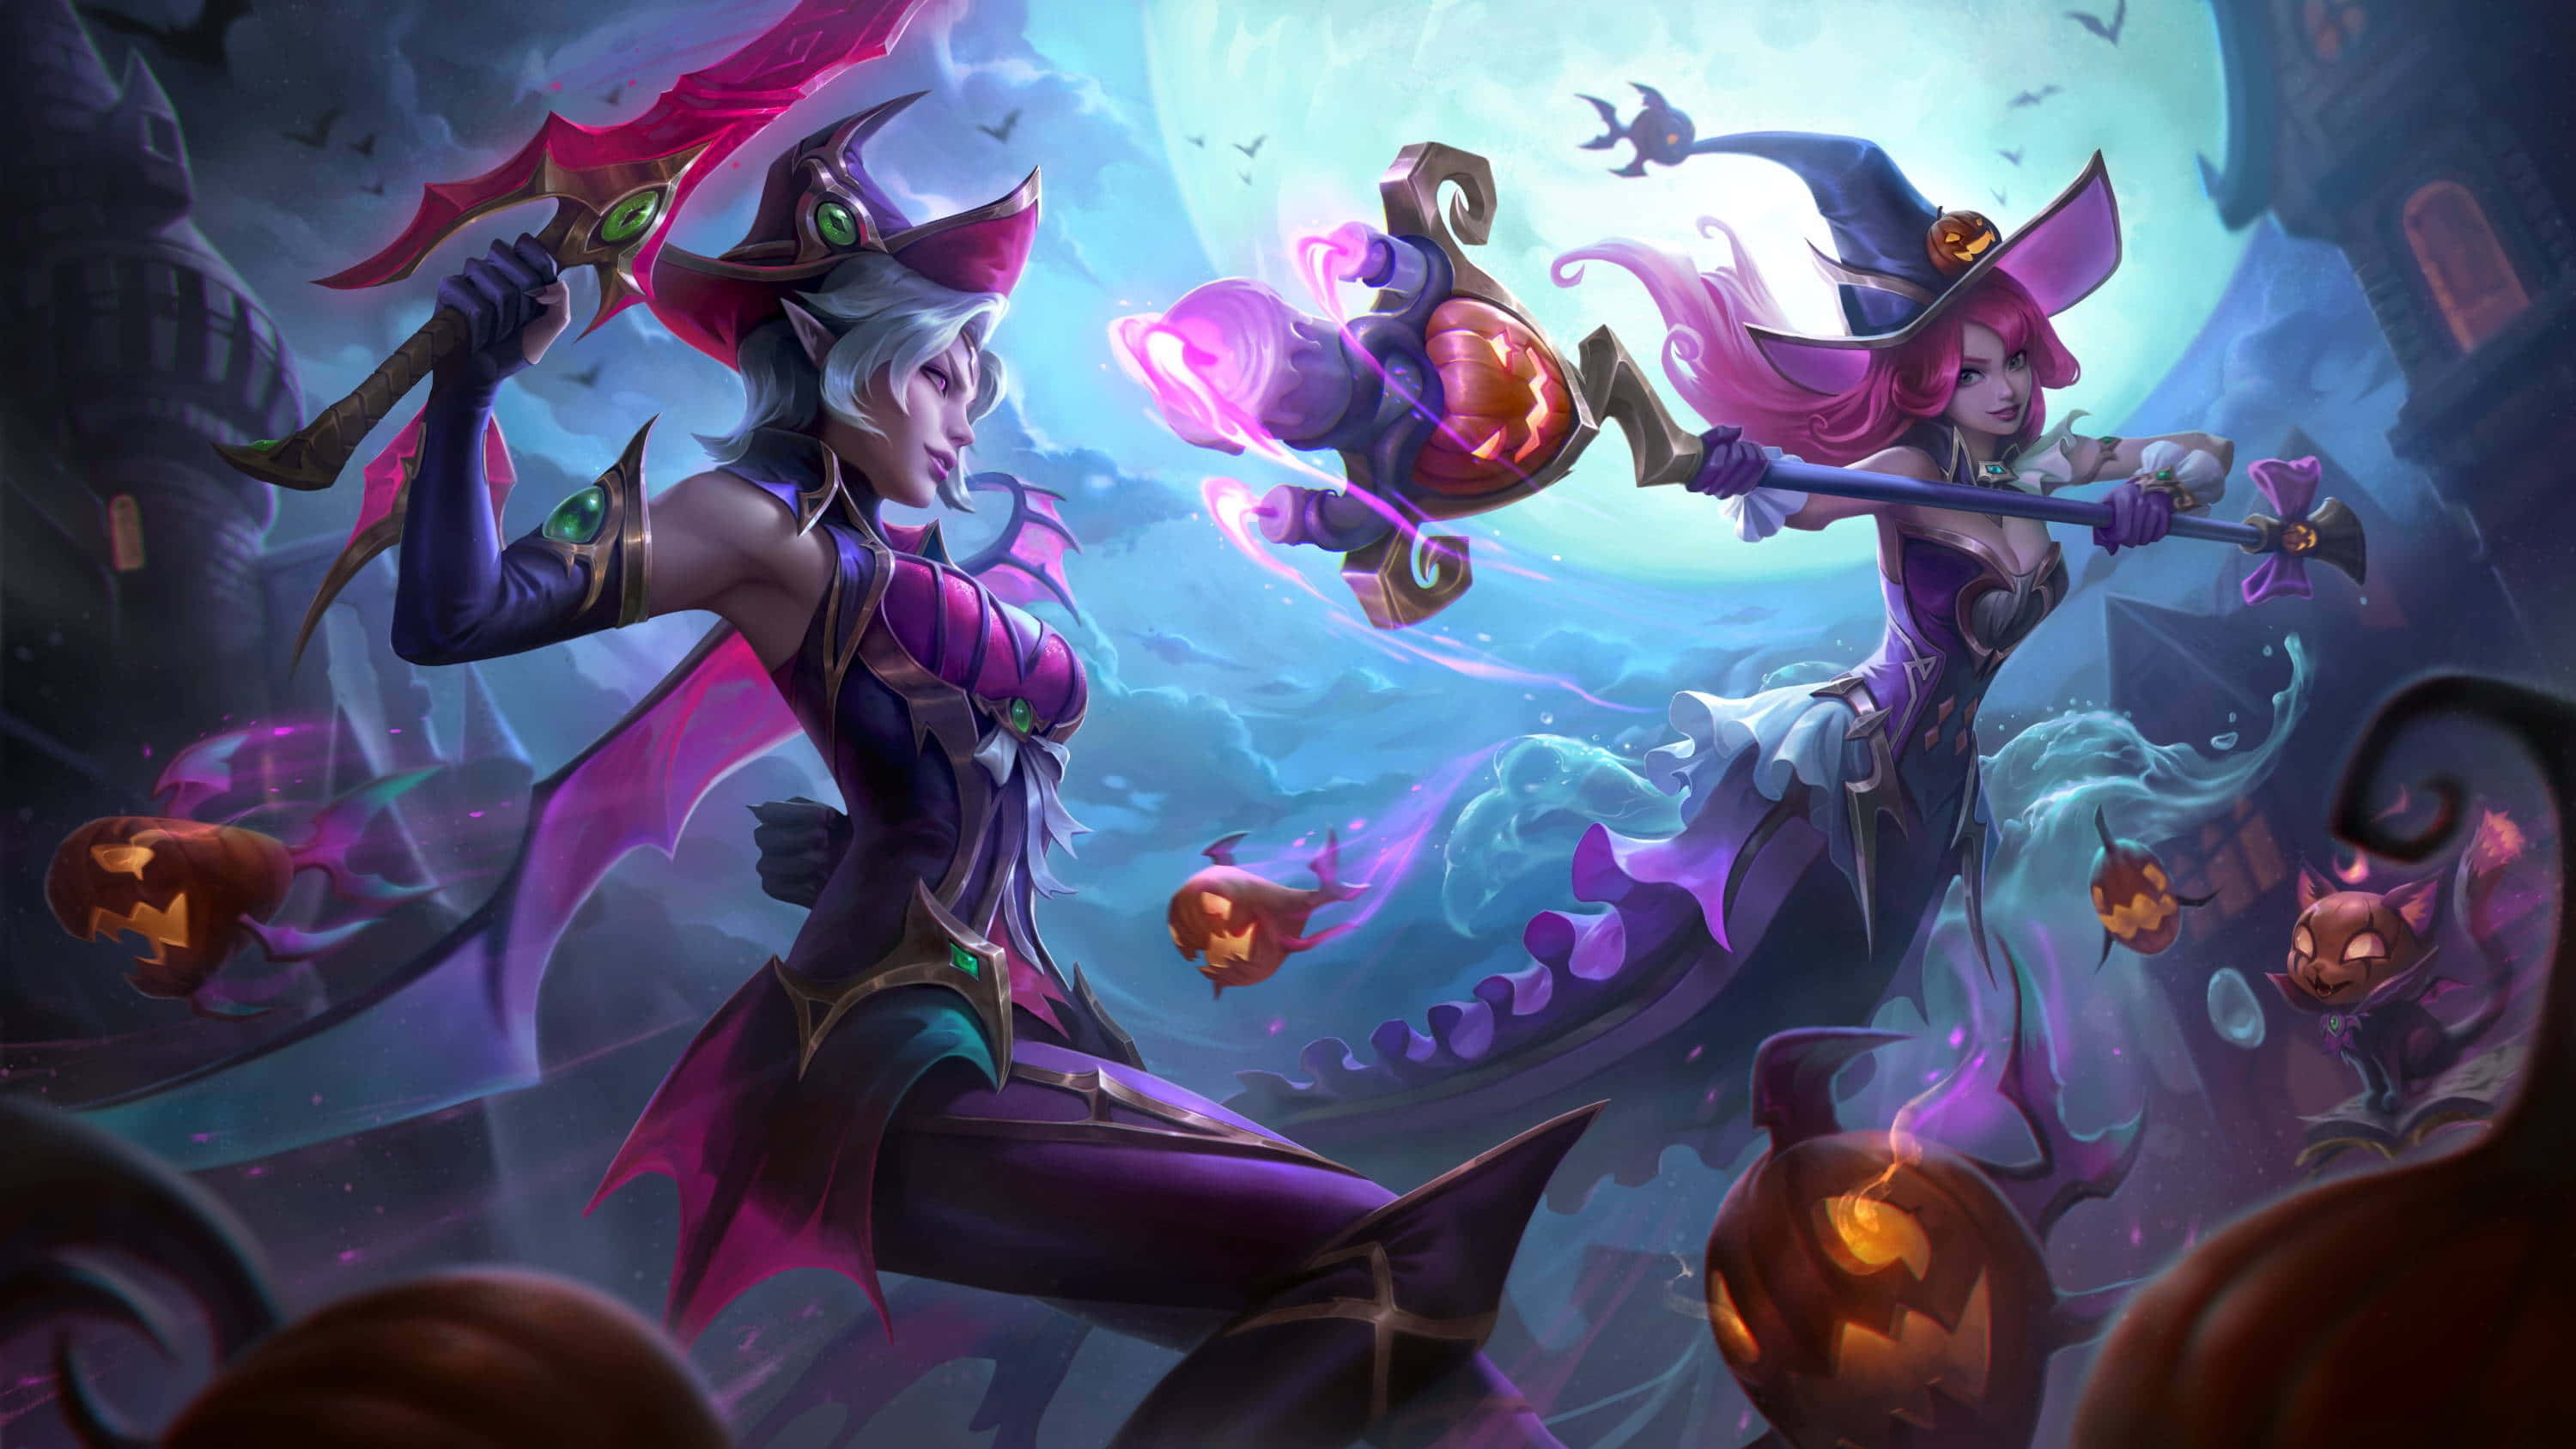 Enjoy some spooky fun this Halloween with themed games! Wallpaper